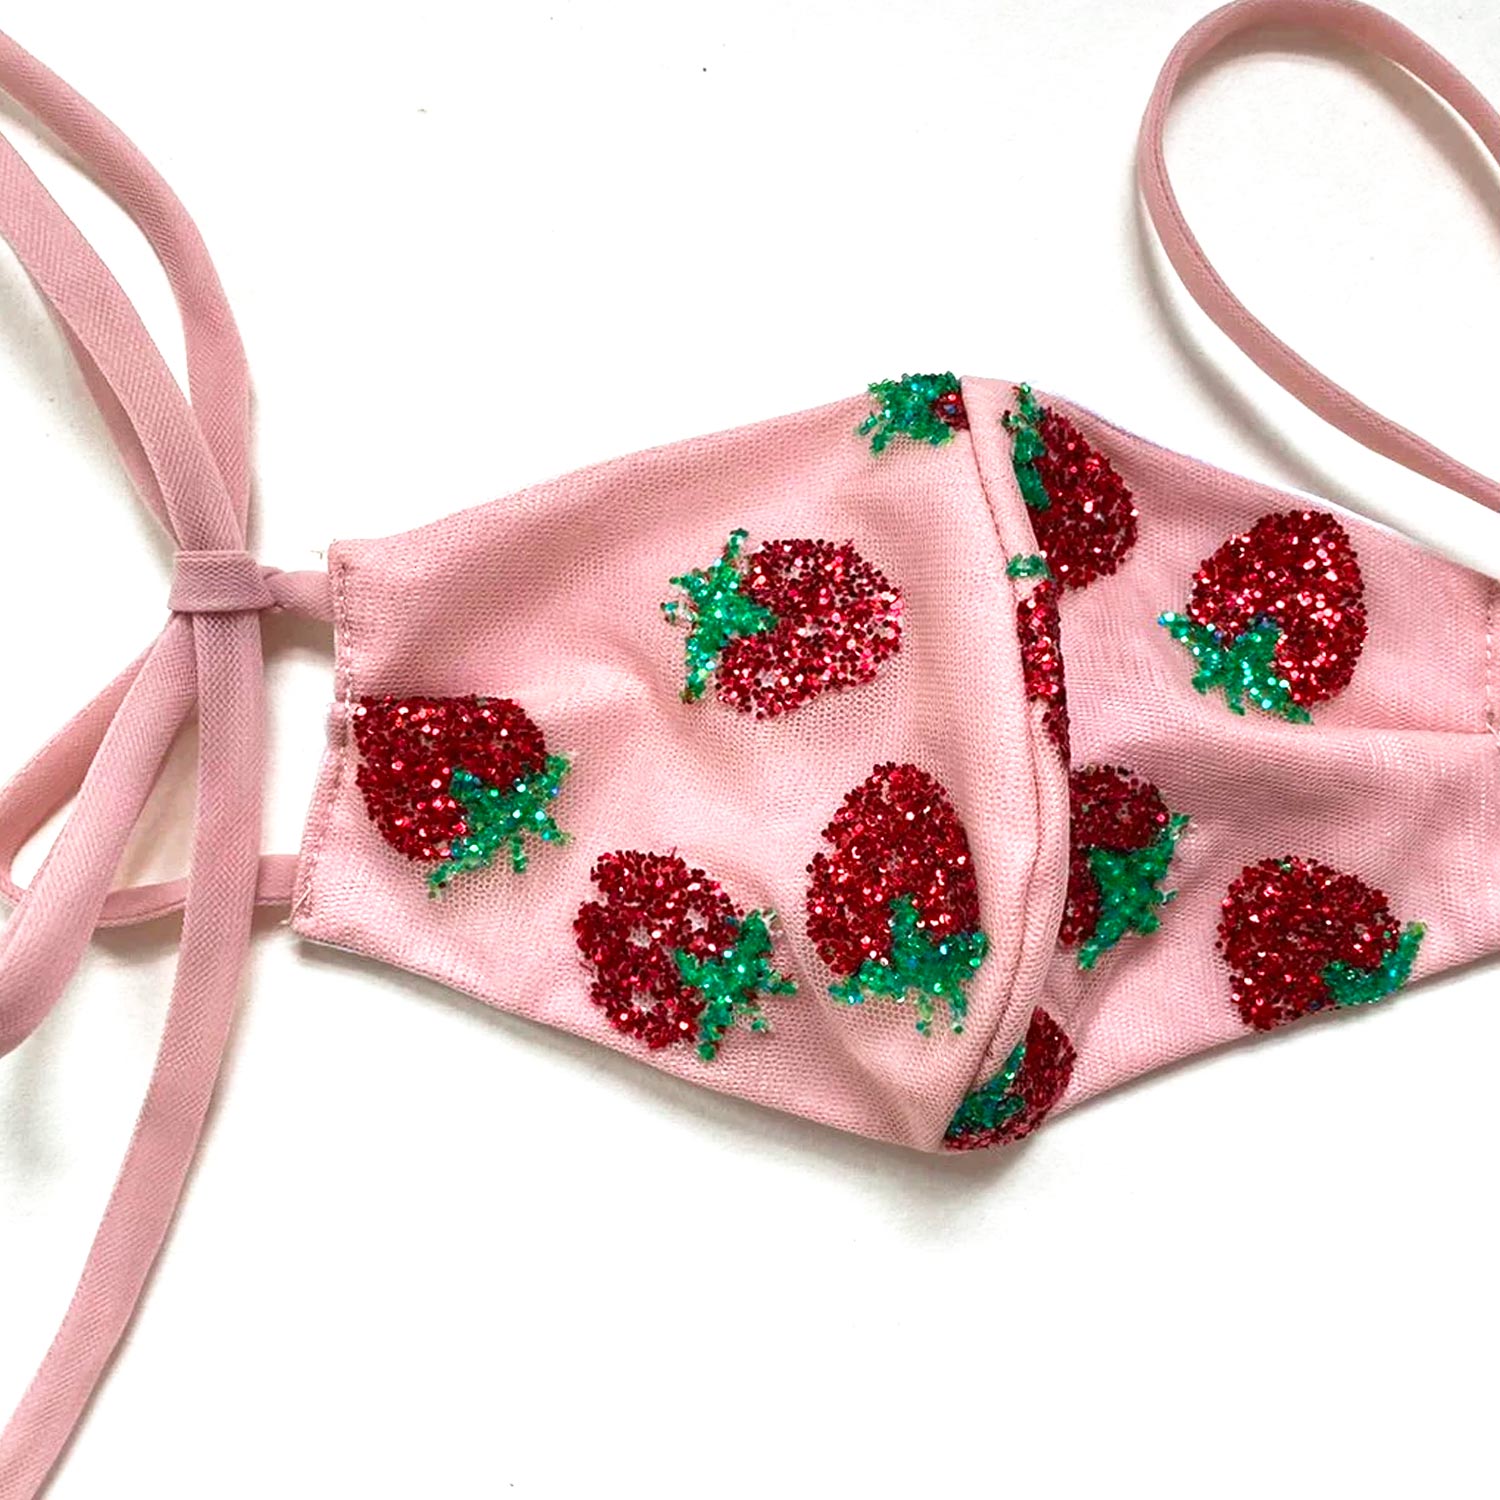 A pink mask with a strawberry sequin design lays against a white background